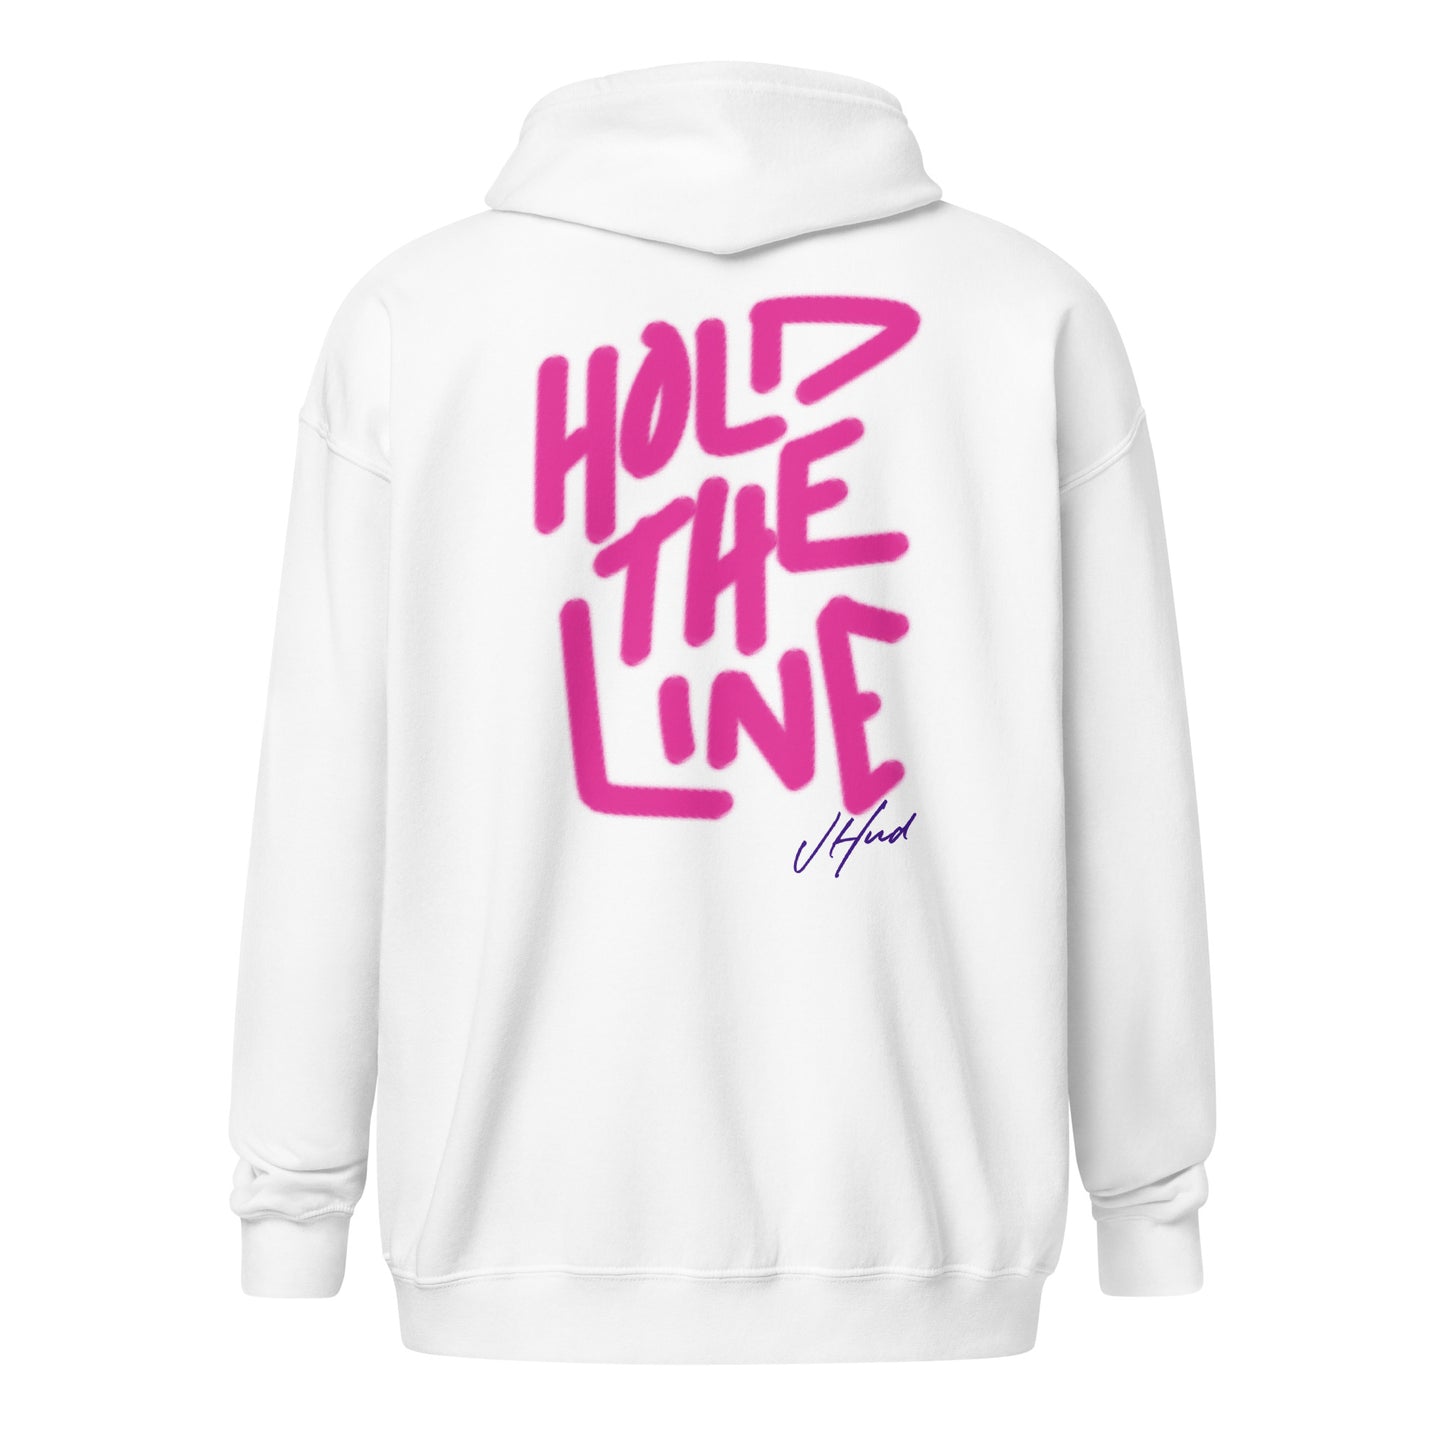 Hold the Line Zip Hoodie - White